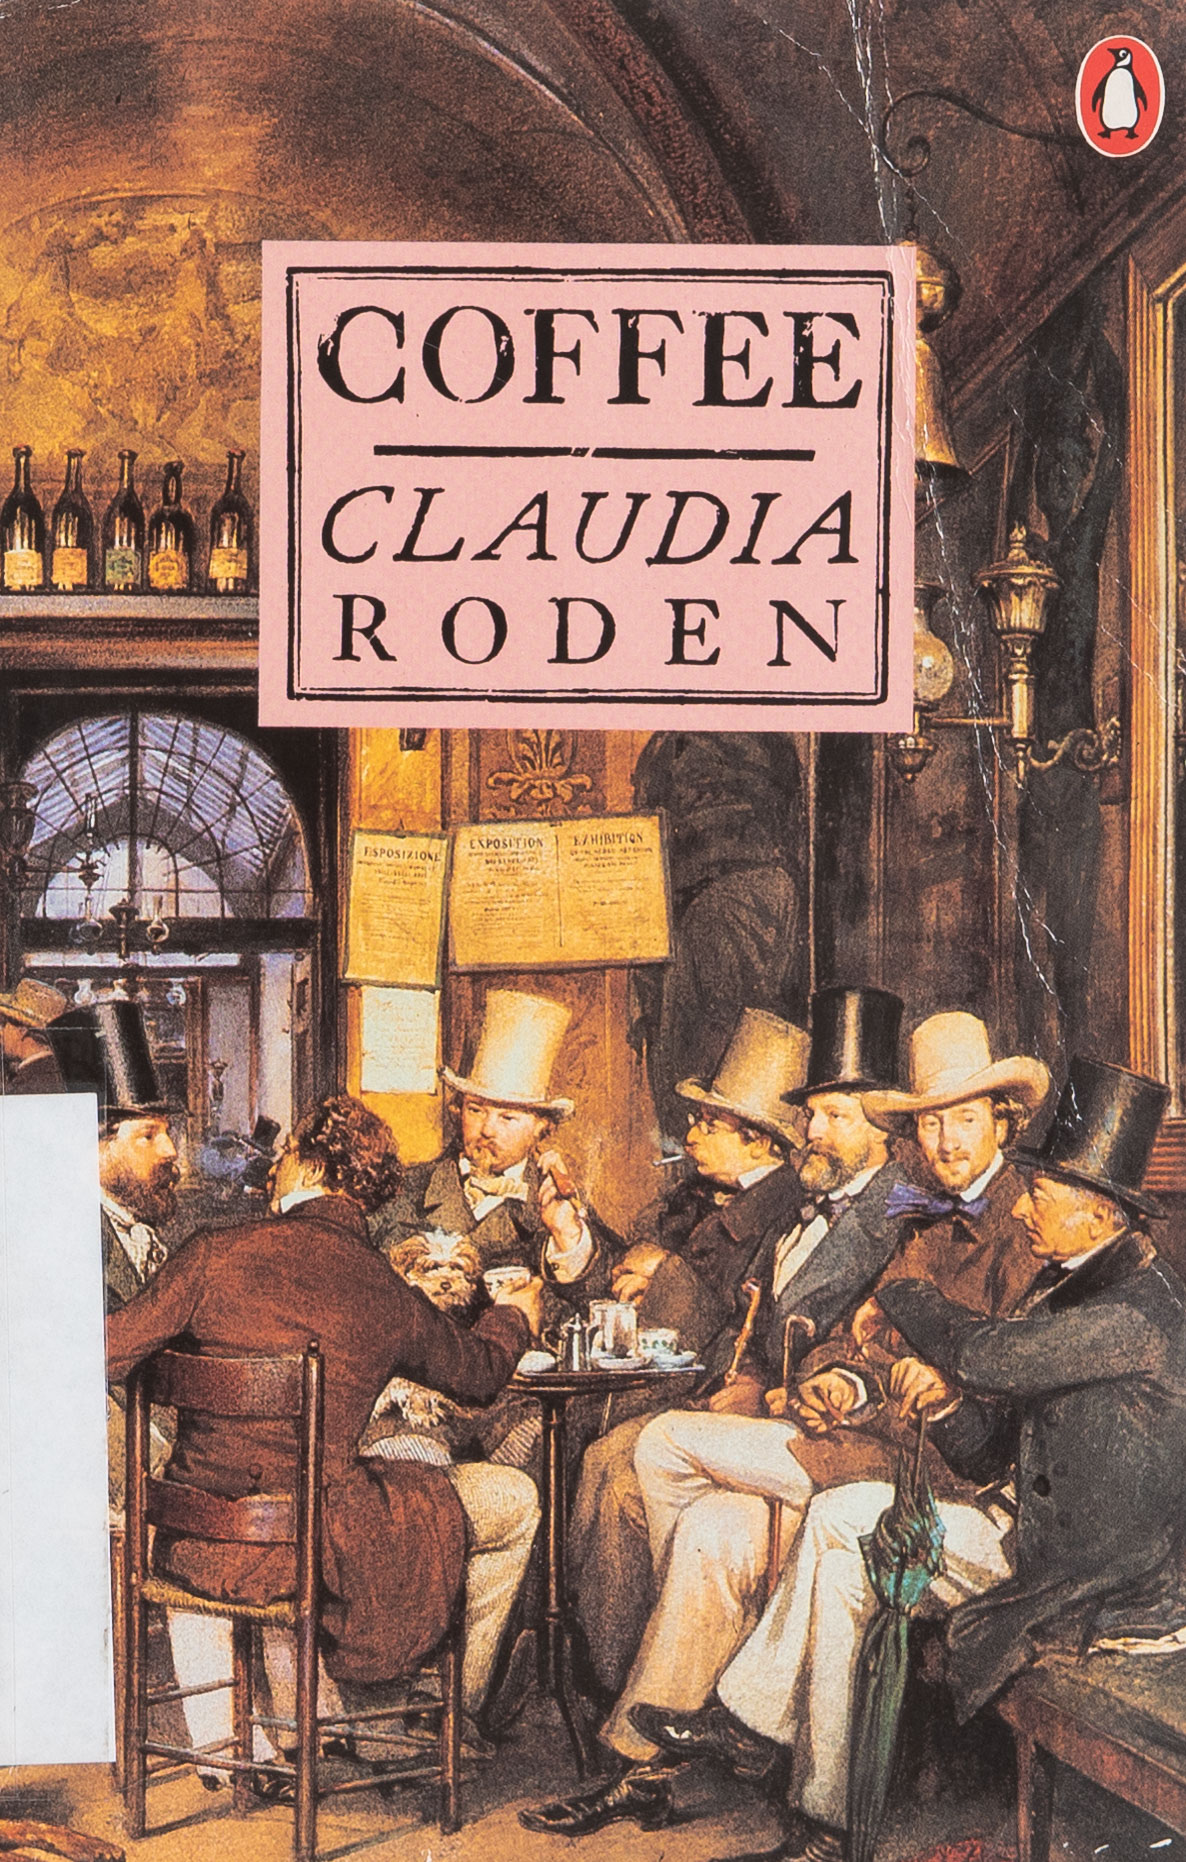 Book cover featuring old image of men in top hats sitting around a small coffee table in a cafe